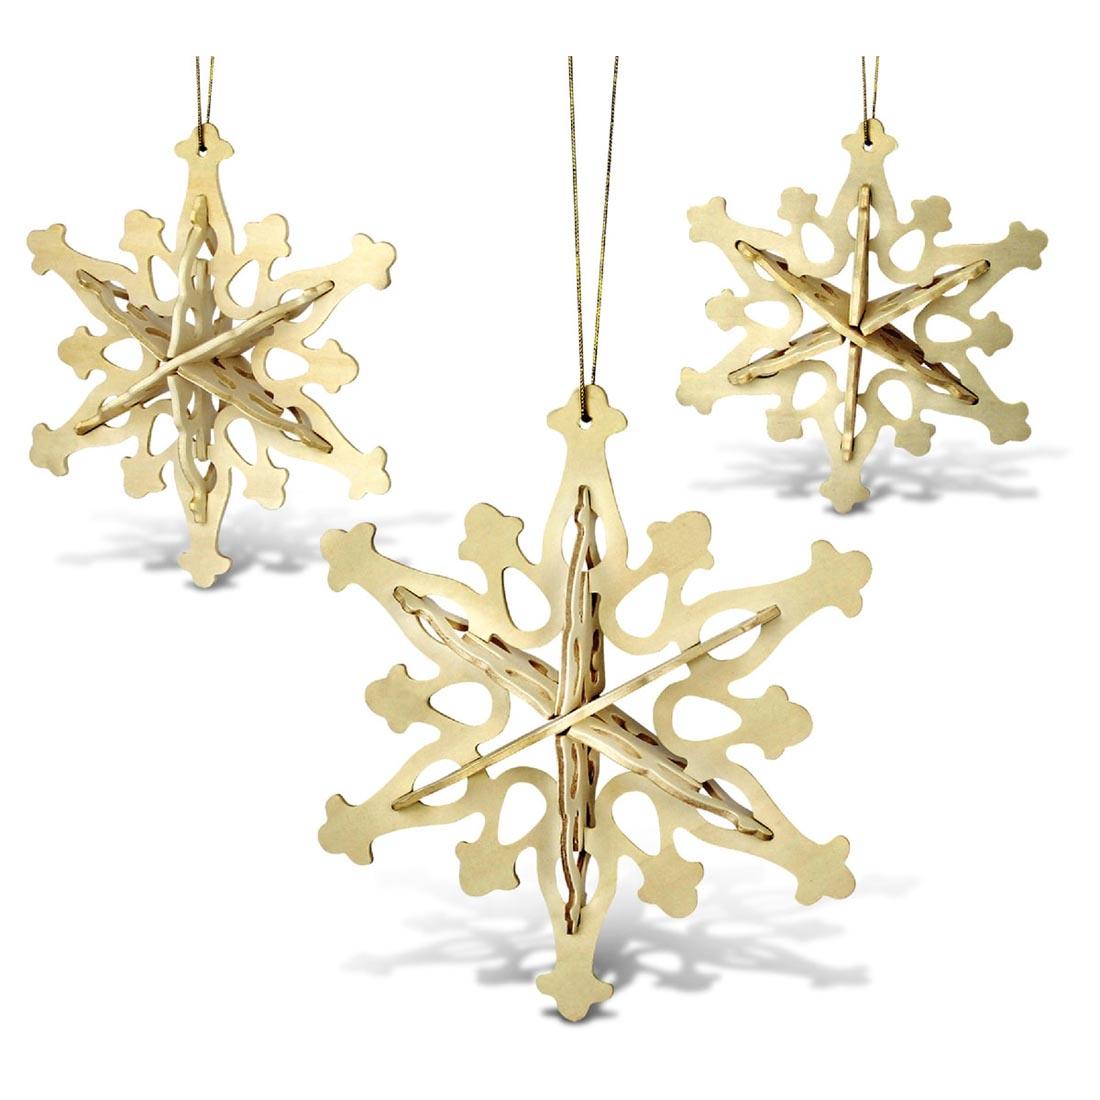 Completed examples of Snowflake Ornaments 3D Wooden Puzzles by Puzzled Inc